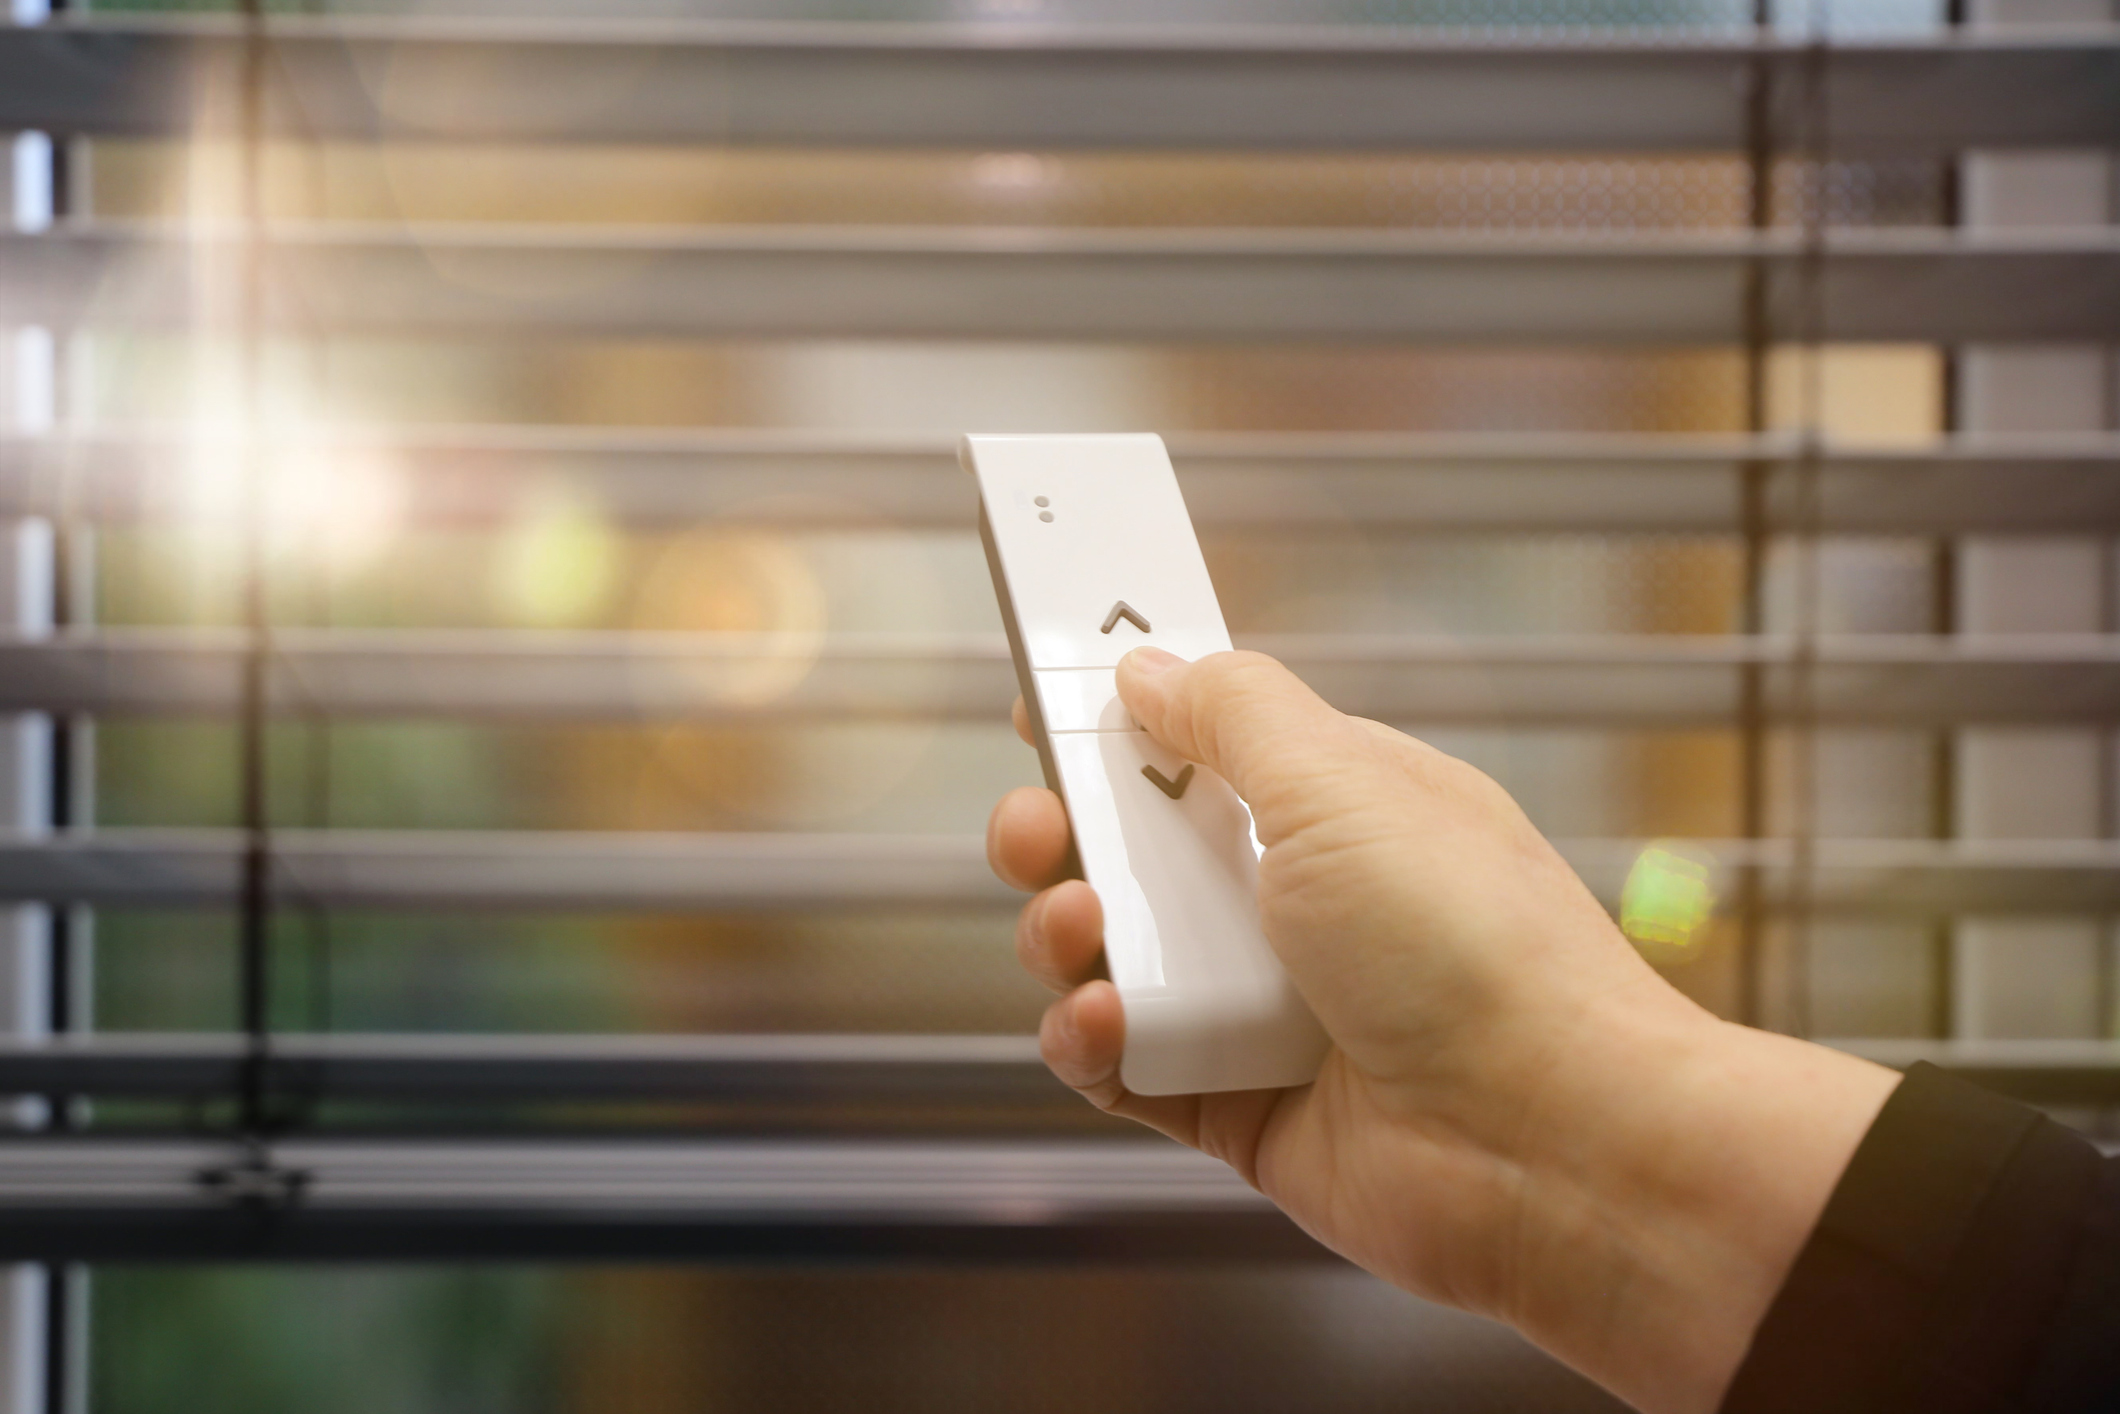 Smart shading blinds controlled with remote.